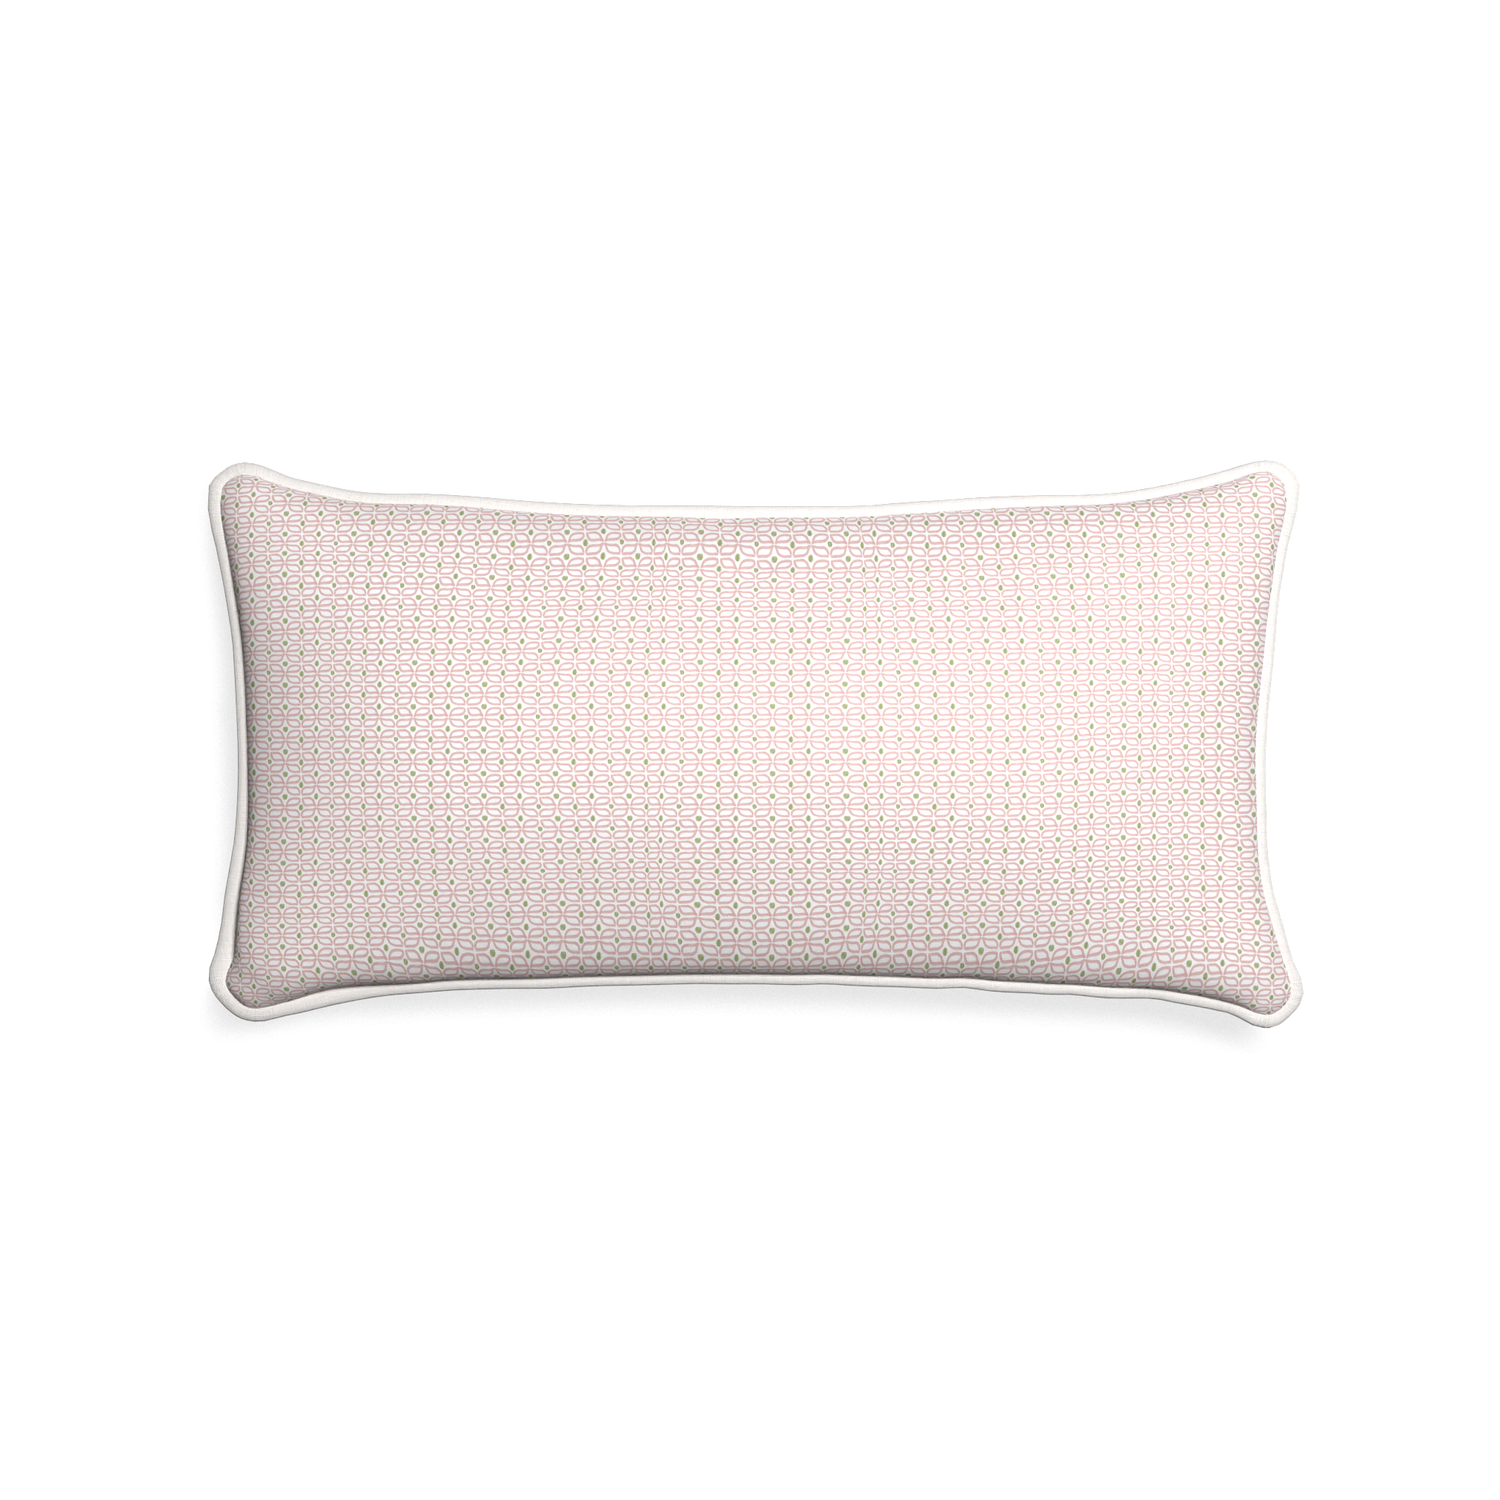 Midi-lumbar loomi pink custom pink geometricpillow with snow piping on white background